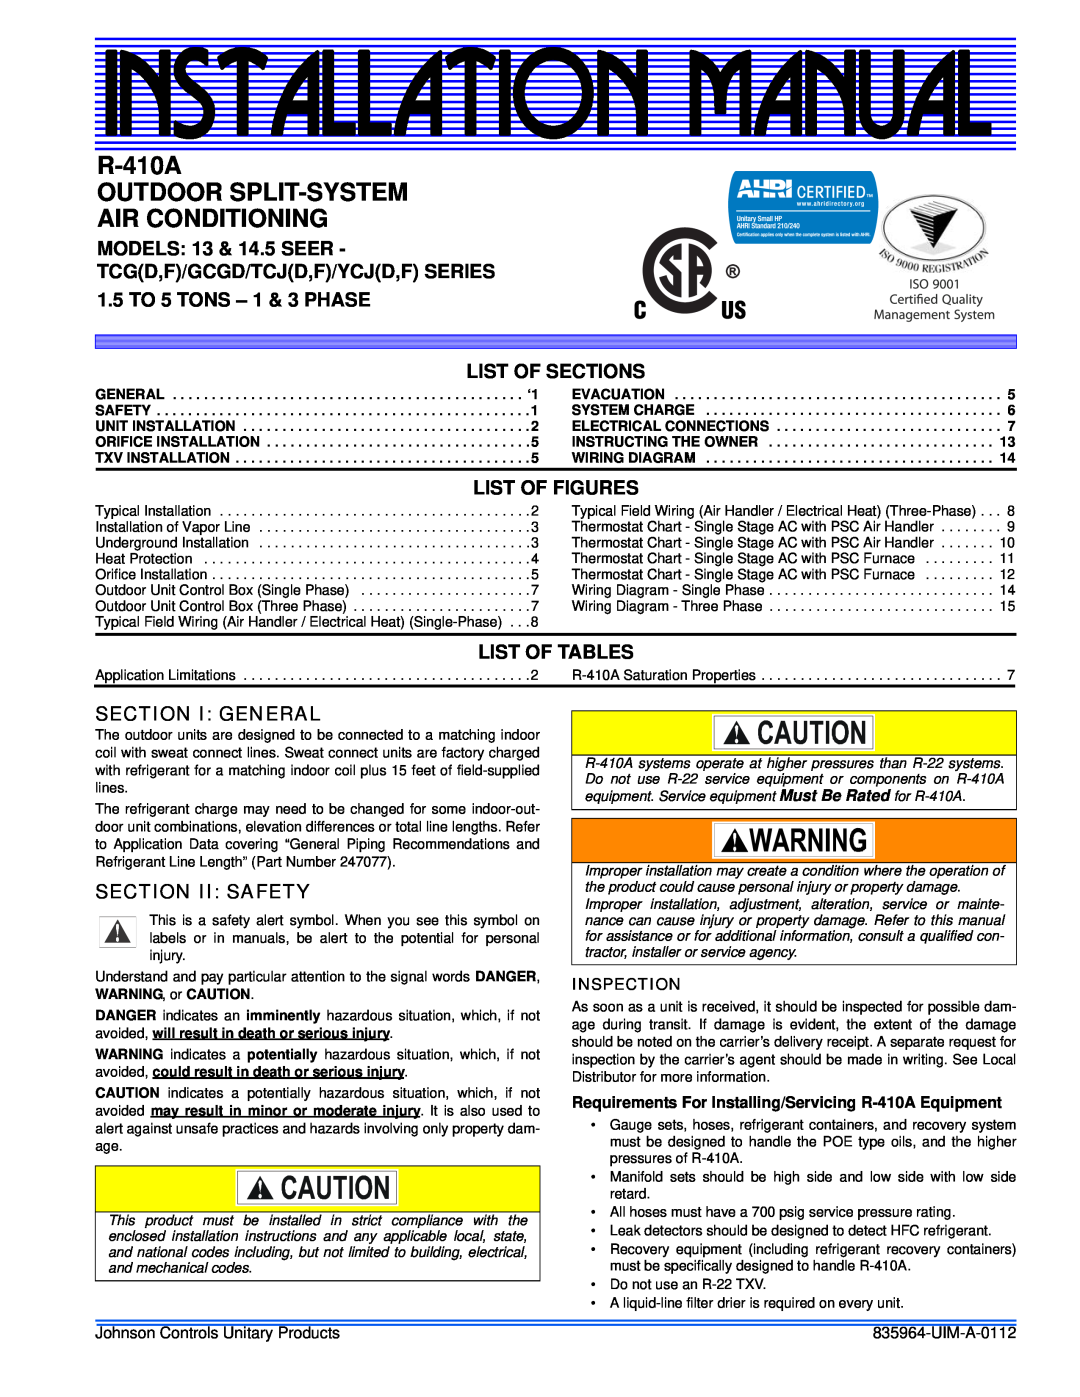 Johnson Controls installation manual R-410A OUTDOOR SPLIT-SYSTEM AIR CONDITIONING, MODELS 13 & 14.5 SEER, Inspection 